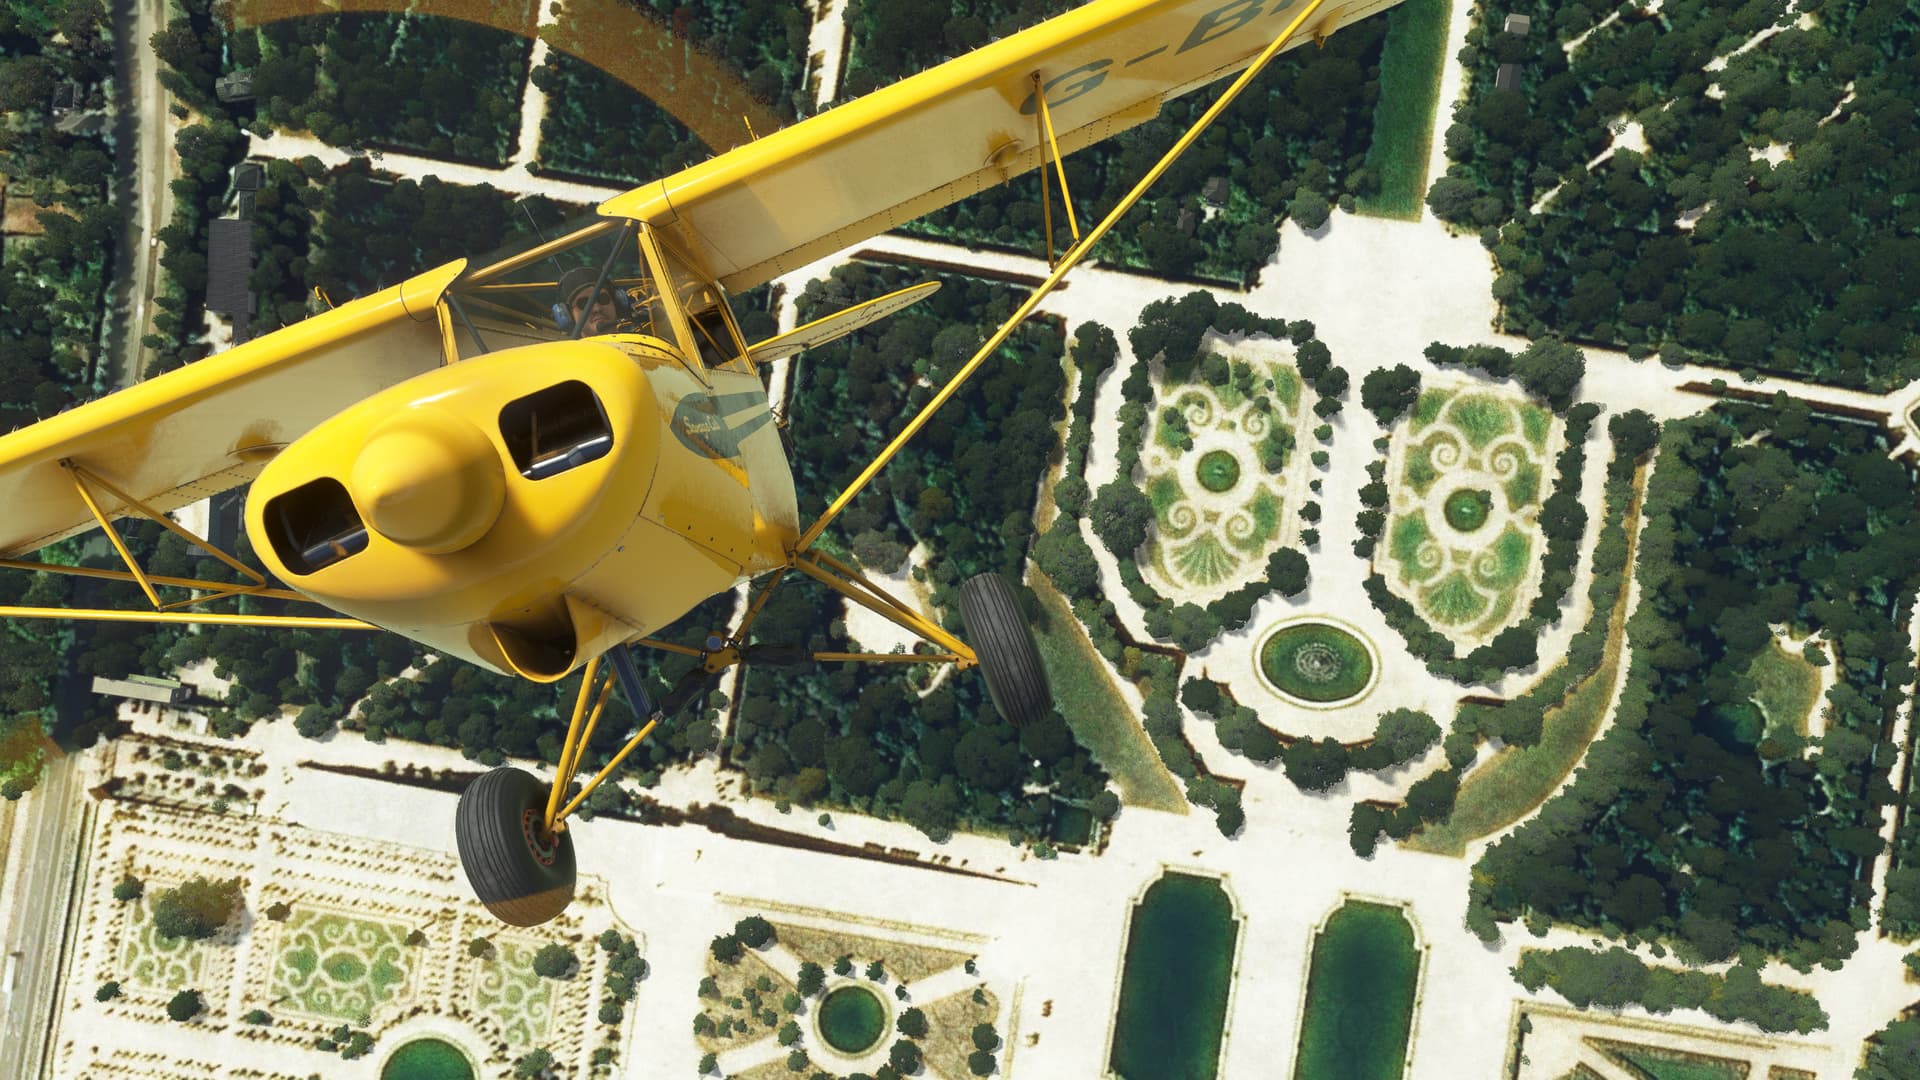 A head on view of a Savage Cub flying straight up toward the camera over the palace of Versailles. There are several gardens and fountains visible below.